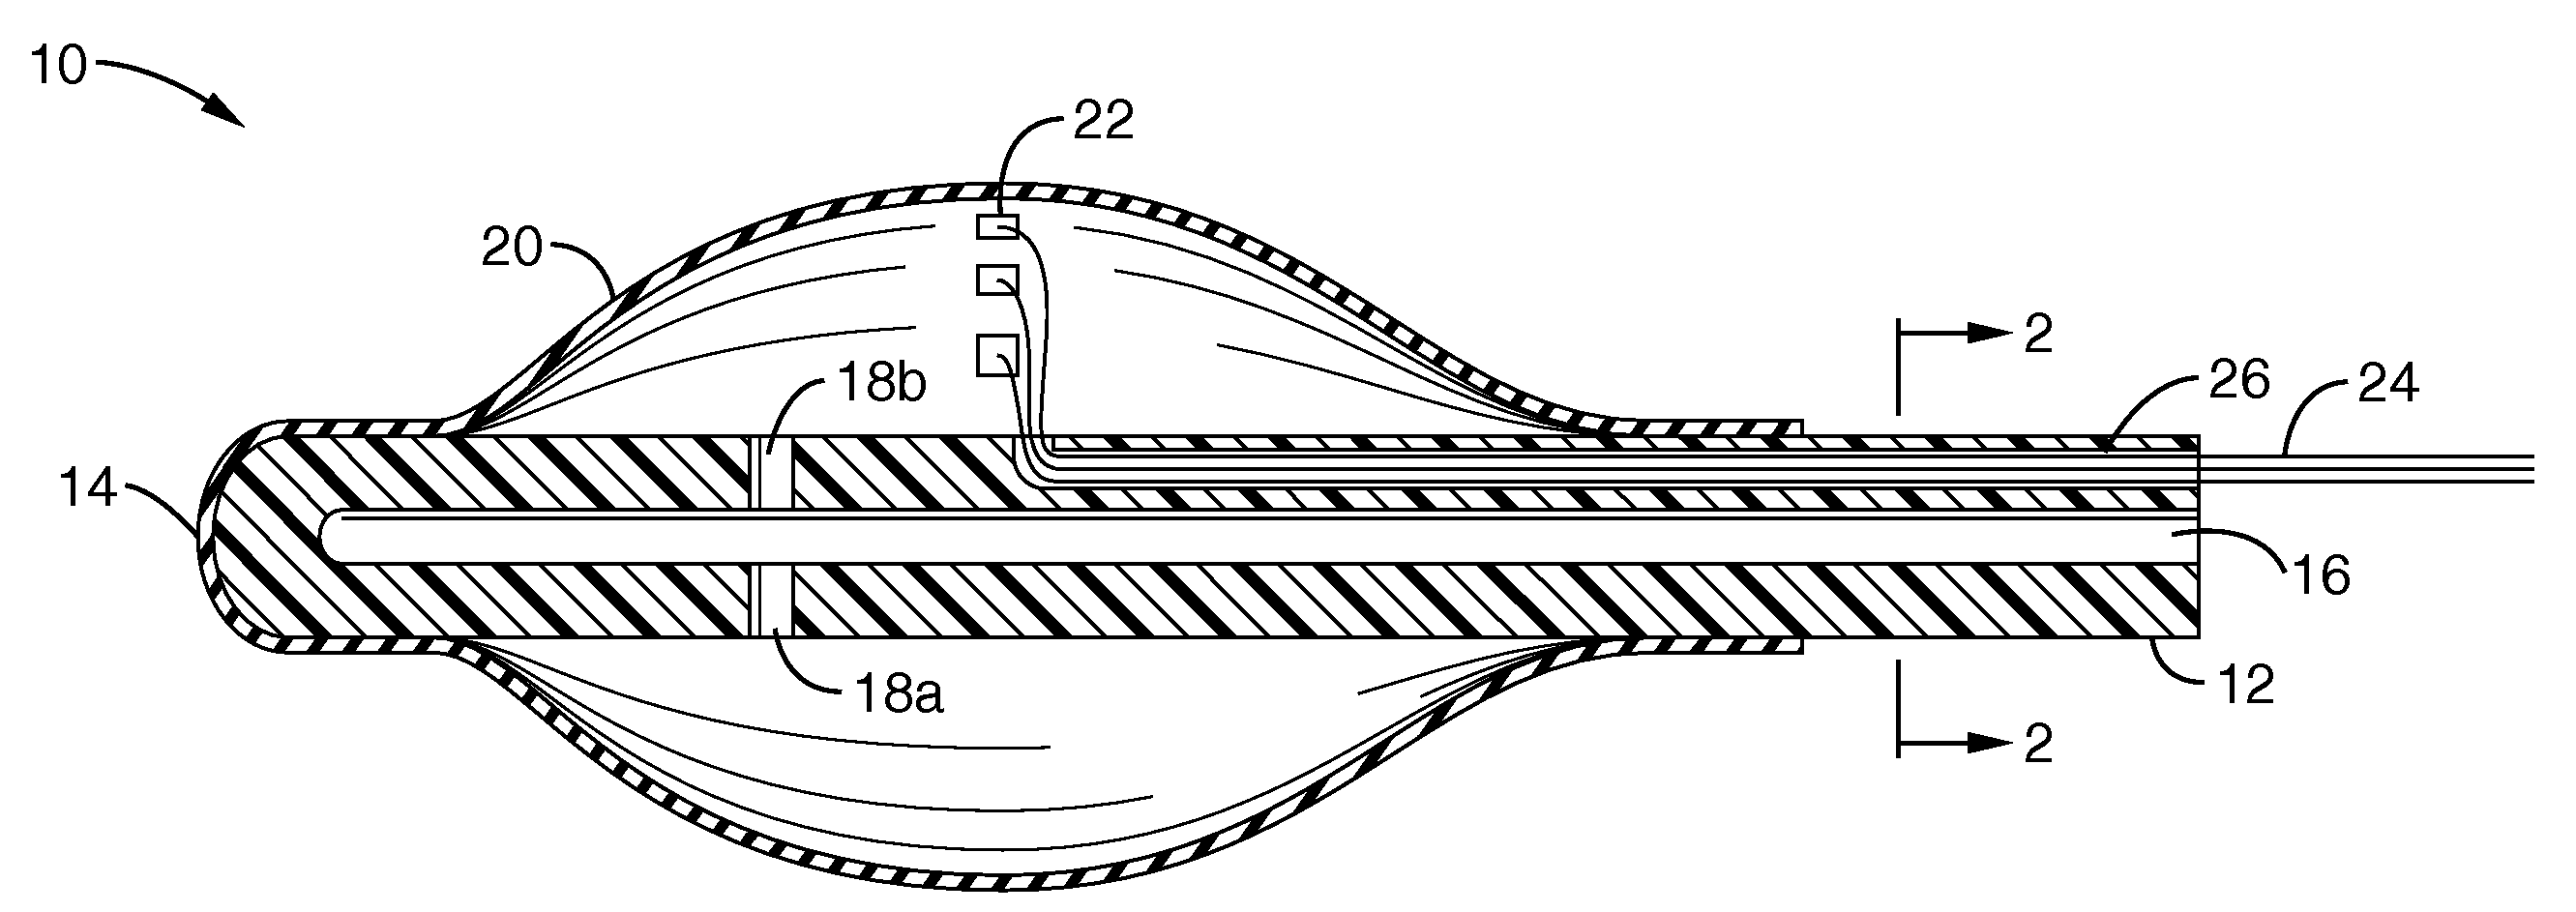 Catheter based balloon for therapy modification and positioning of tissue